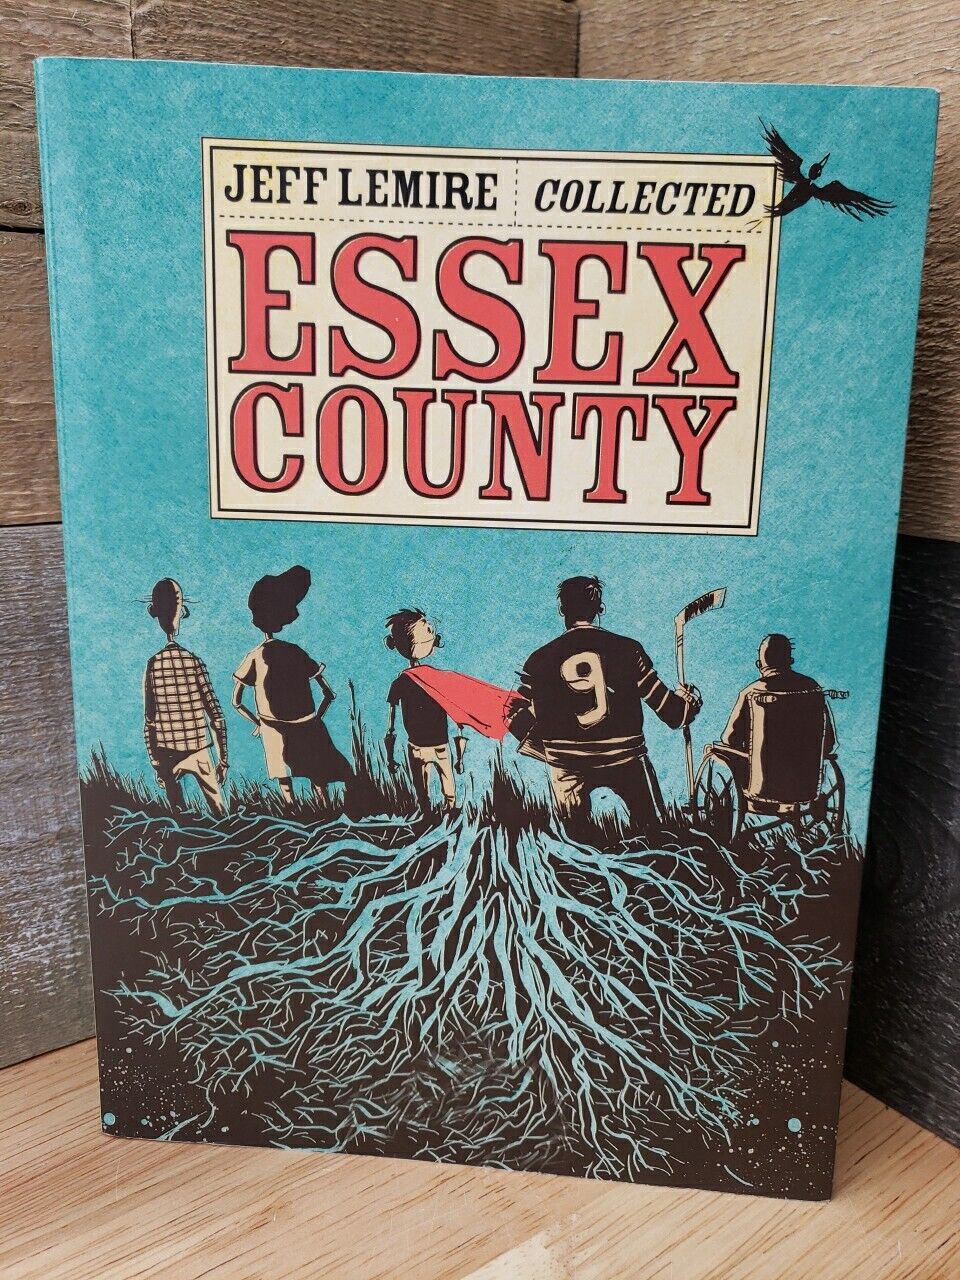 Jeff Lemire Collected Essex County 